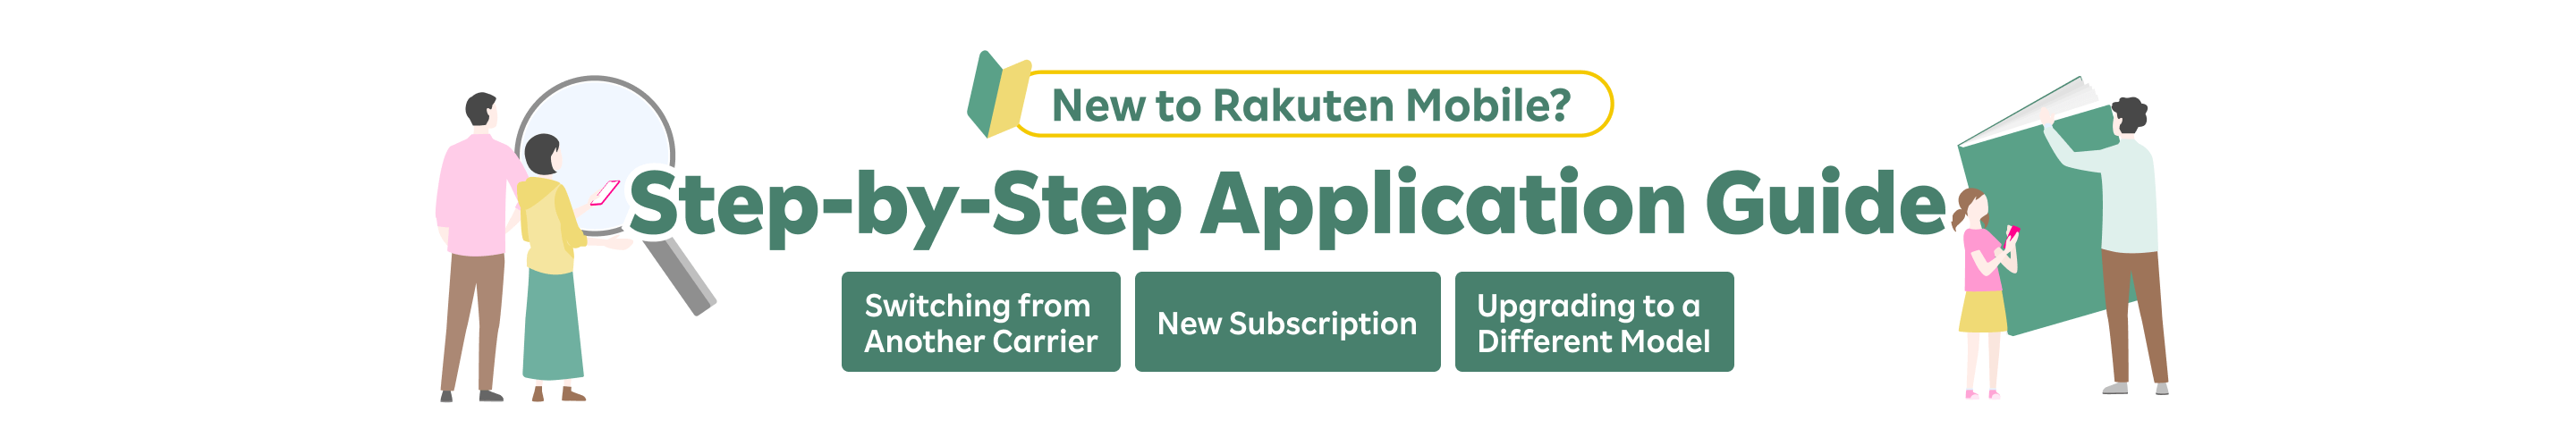 New to Rakuten Mobile? Step-by-Step Application Guide